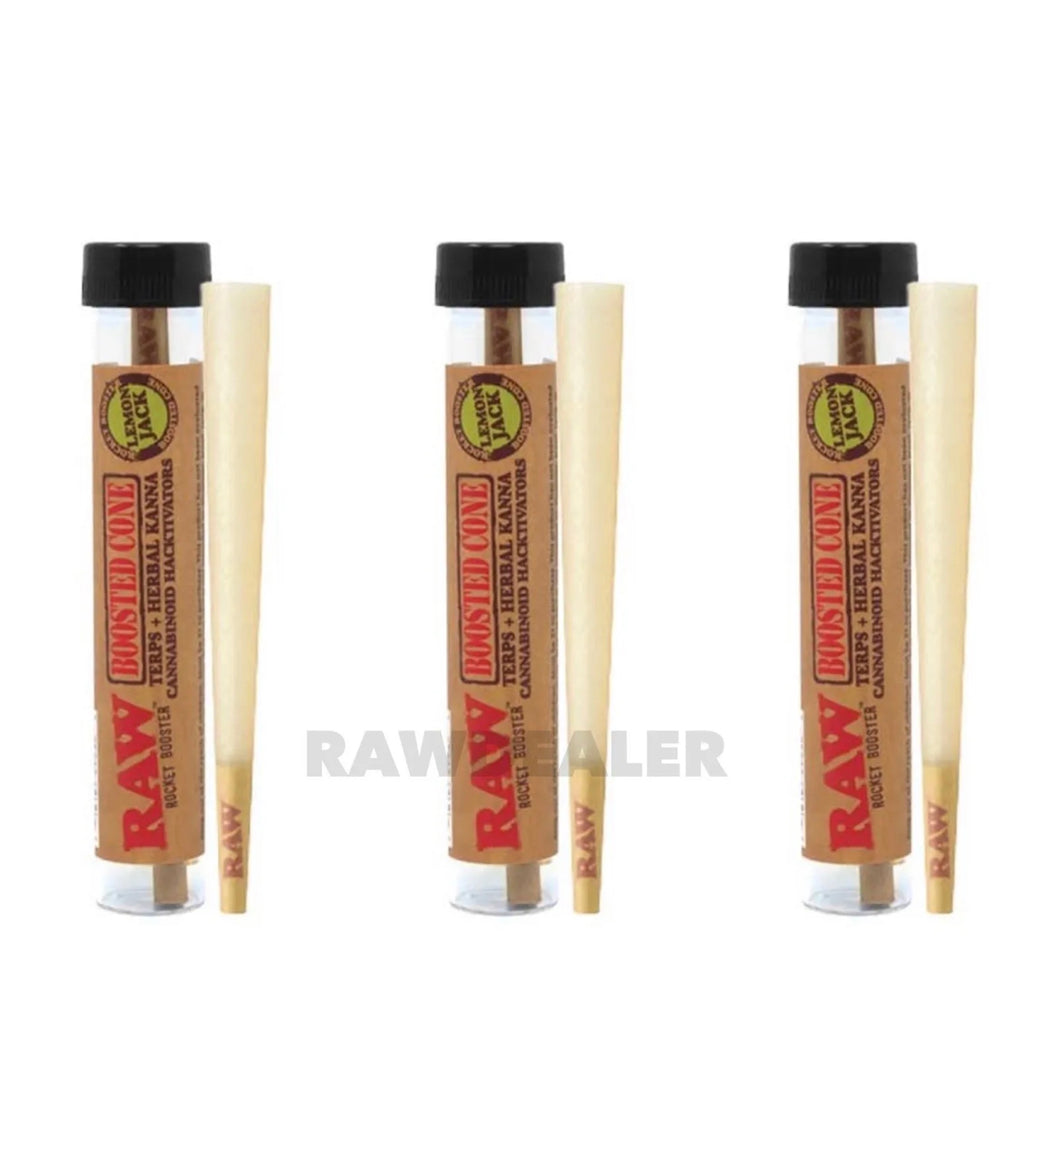 raw rocket booster king size pre rolled cone 3 packs (Lemon Jack)